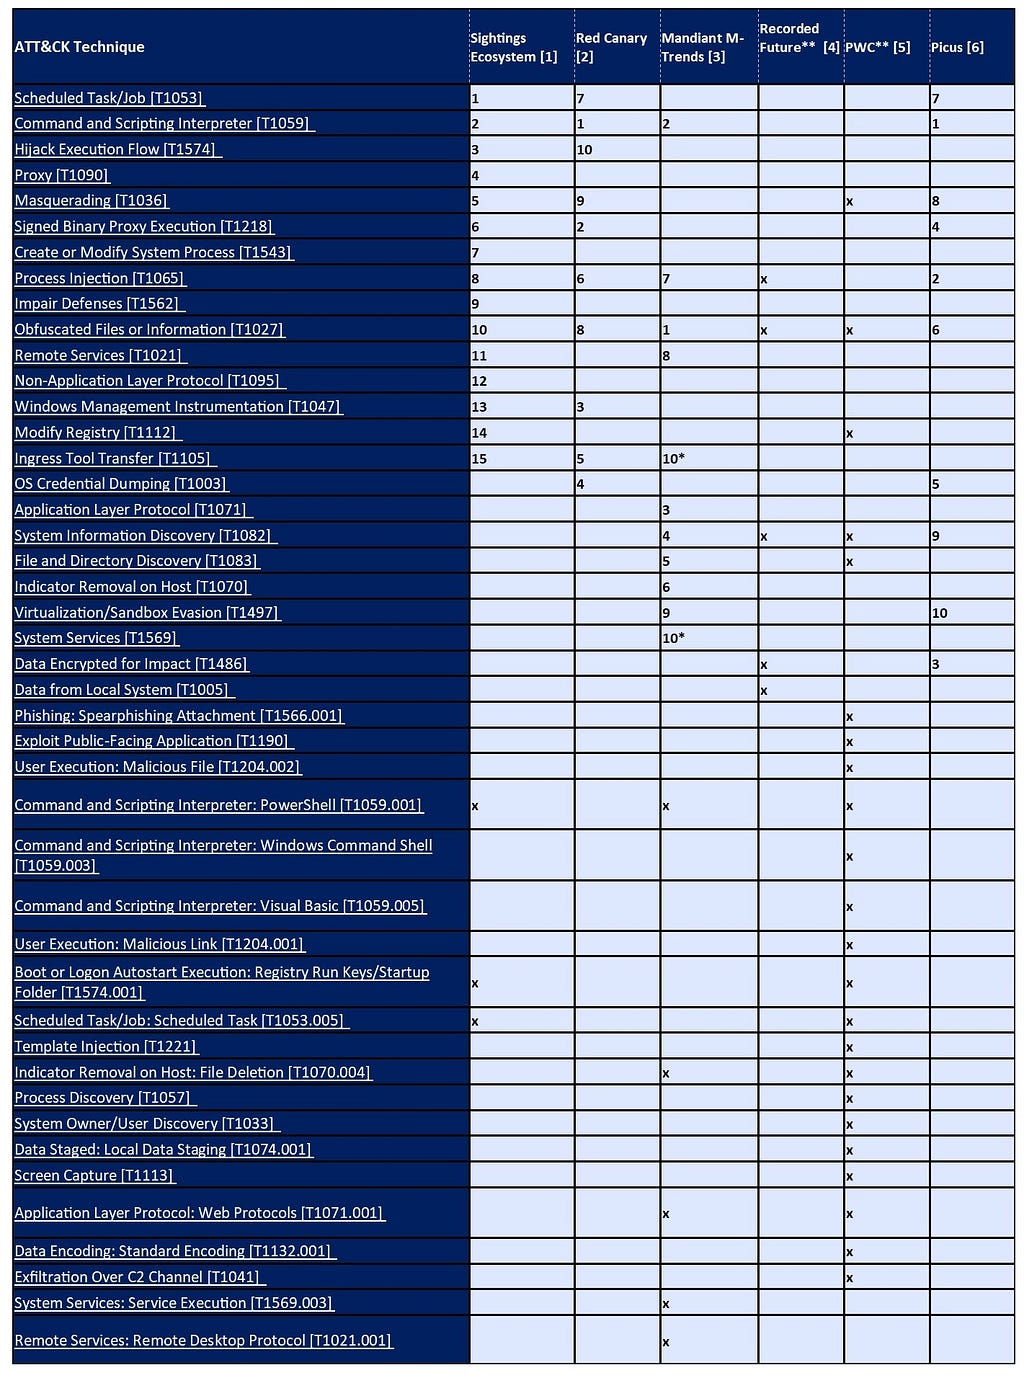 A spreadsheet image comparing the top attack techniques found in various publications, including the Center’s sightings ecosystem report, Red Canary, Mendicant, Recorded Future, PWC, and Picus.